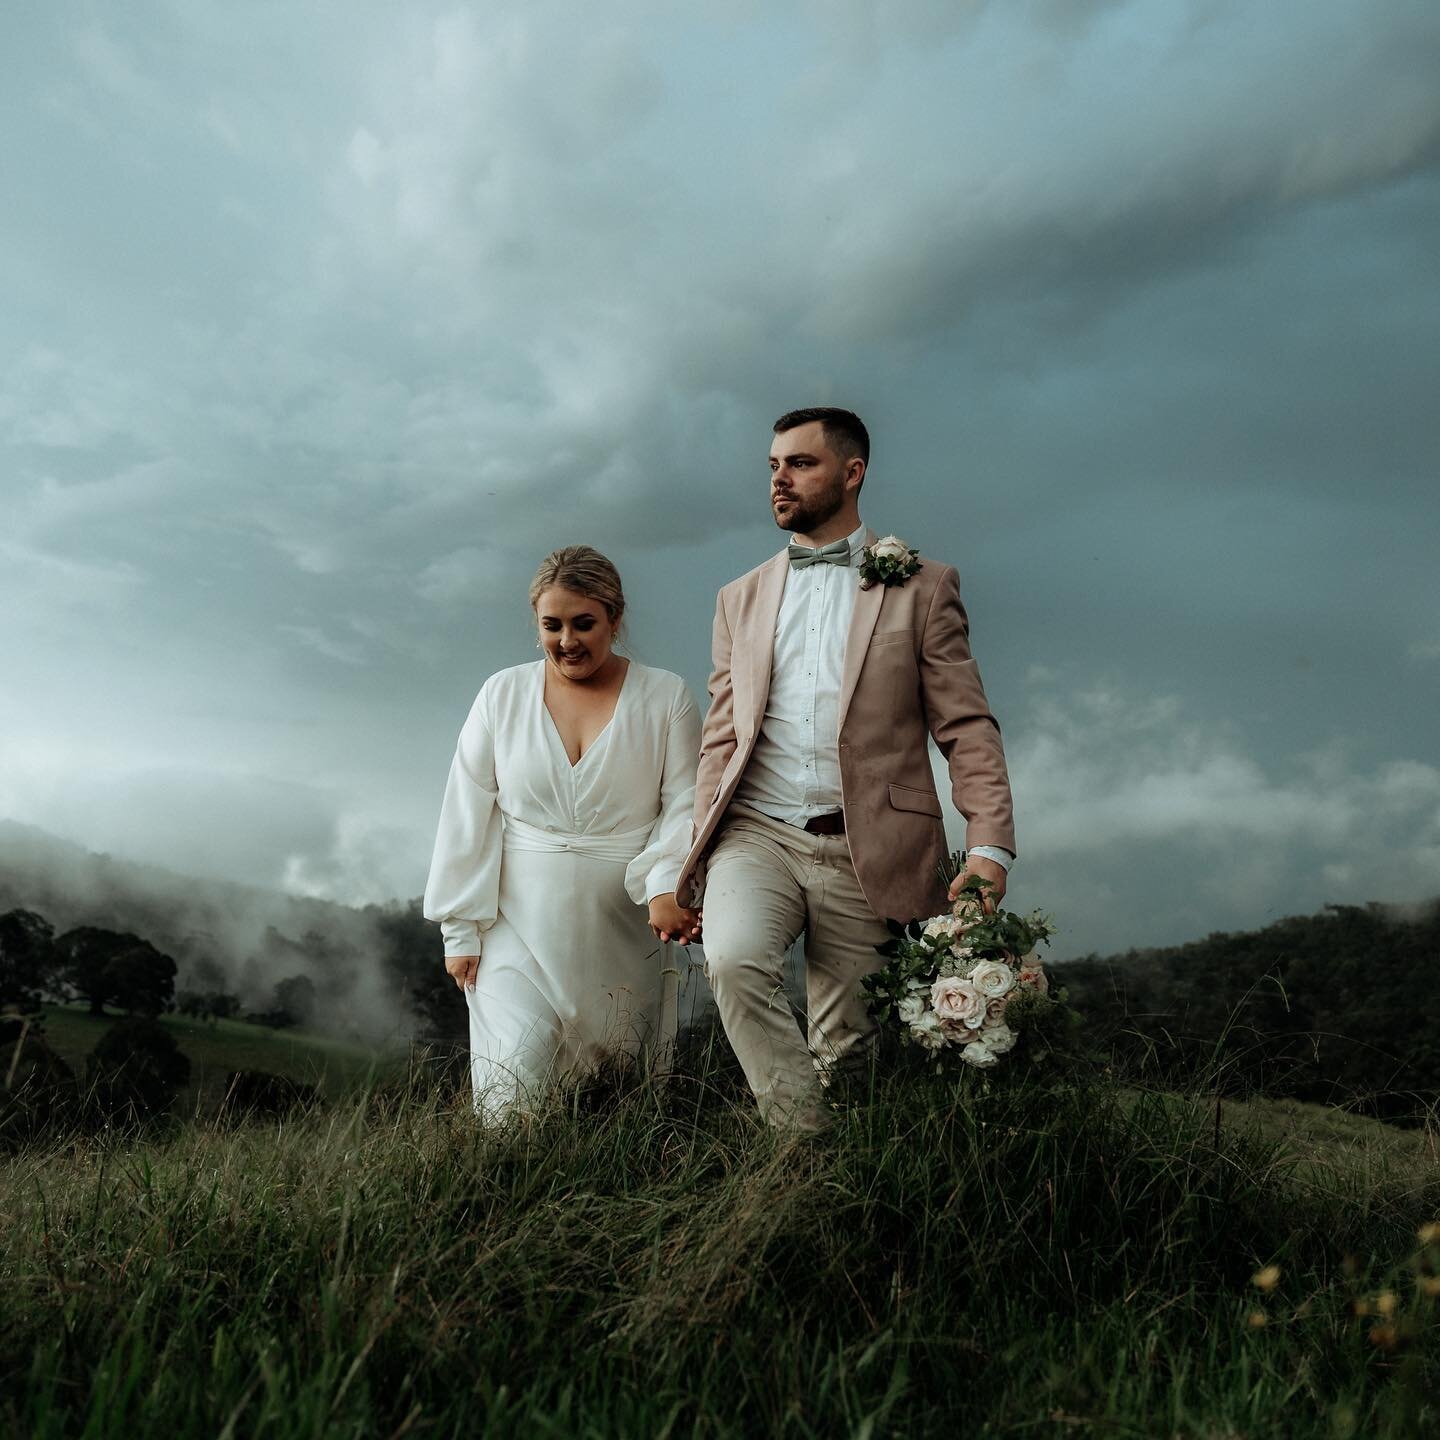 Trudging through wet grass, Sammy and Jake get their reward with some dramatic scenery complete with silver lined clouds. Congrats guys, thanks for persevering in the rain. 
.
. 
. 
. 
#couples #dramaticlandscape #wetwedding #goldcoastweddingphotogra